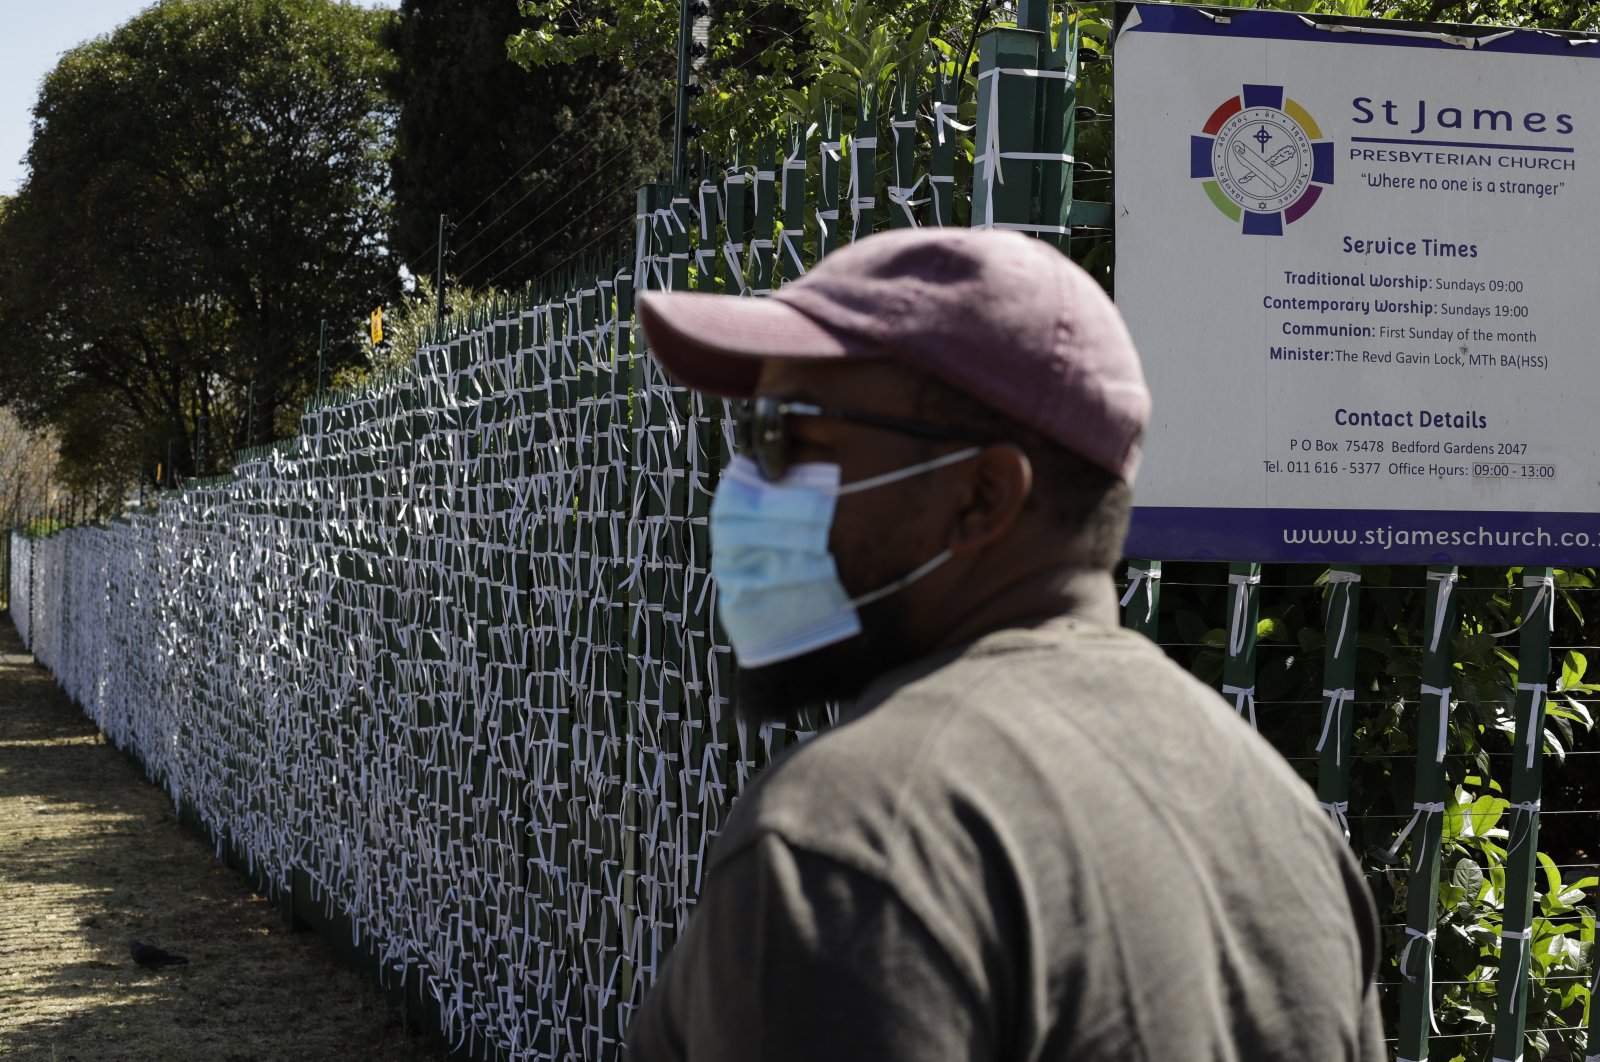 Leonard Makuya, caretaker at the St. James Presbyterian Church in Bedfordview, Johannesburg, walks past a fence with ribbons attached to represent people who have died from COVID-19 in South Africa, Sept. 29, 2020. (AP Photo)